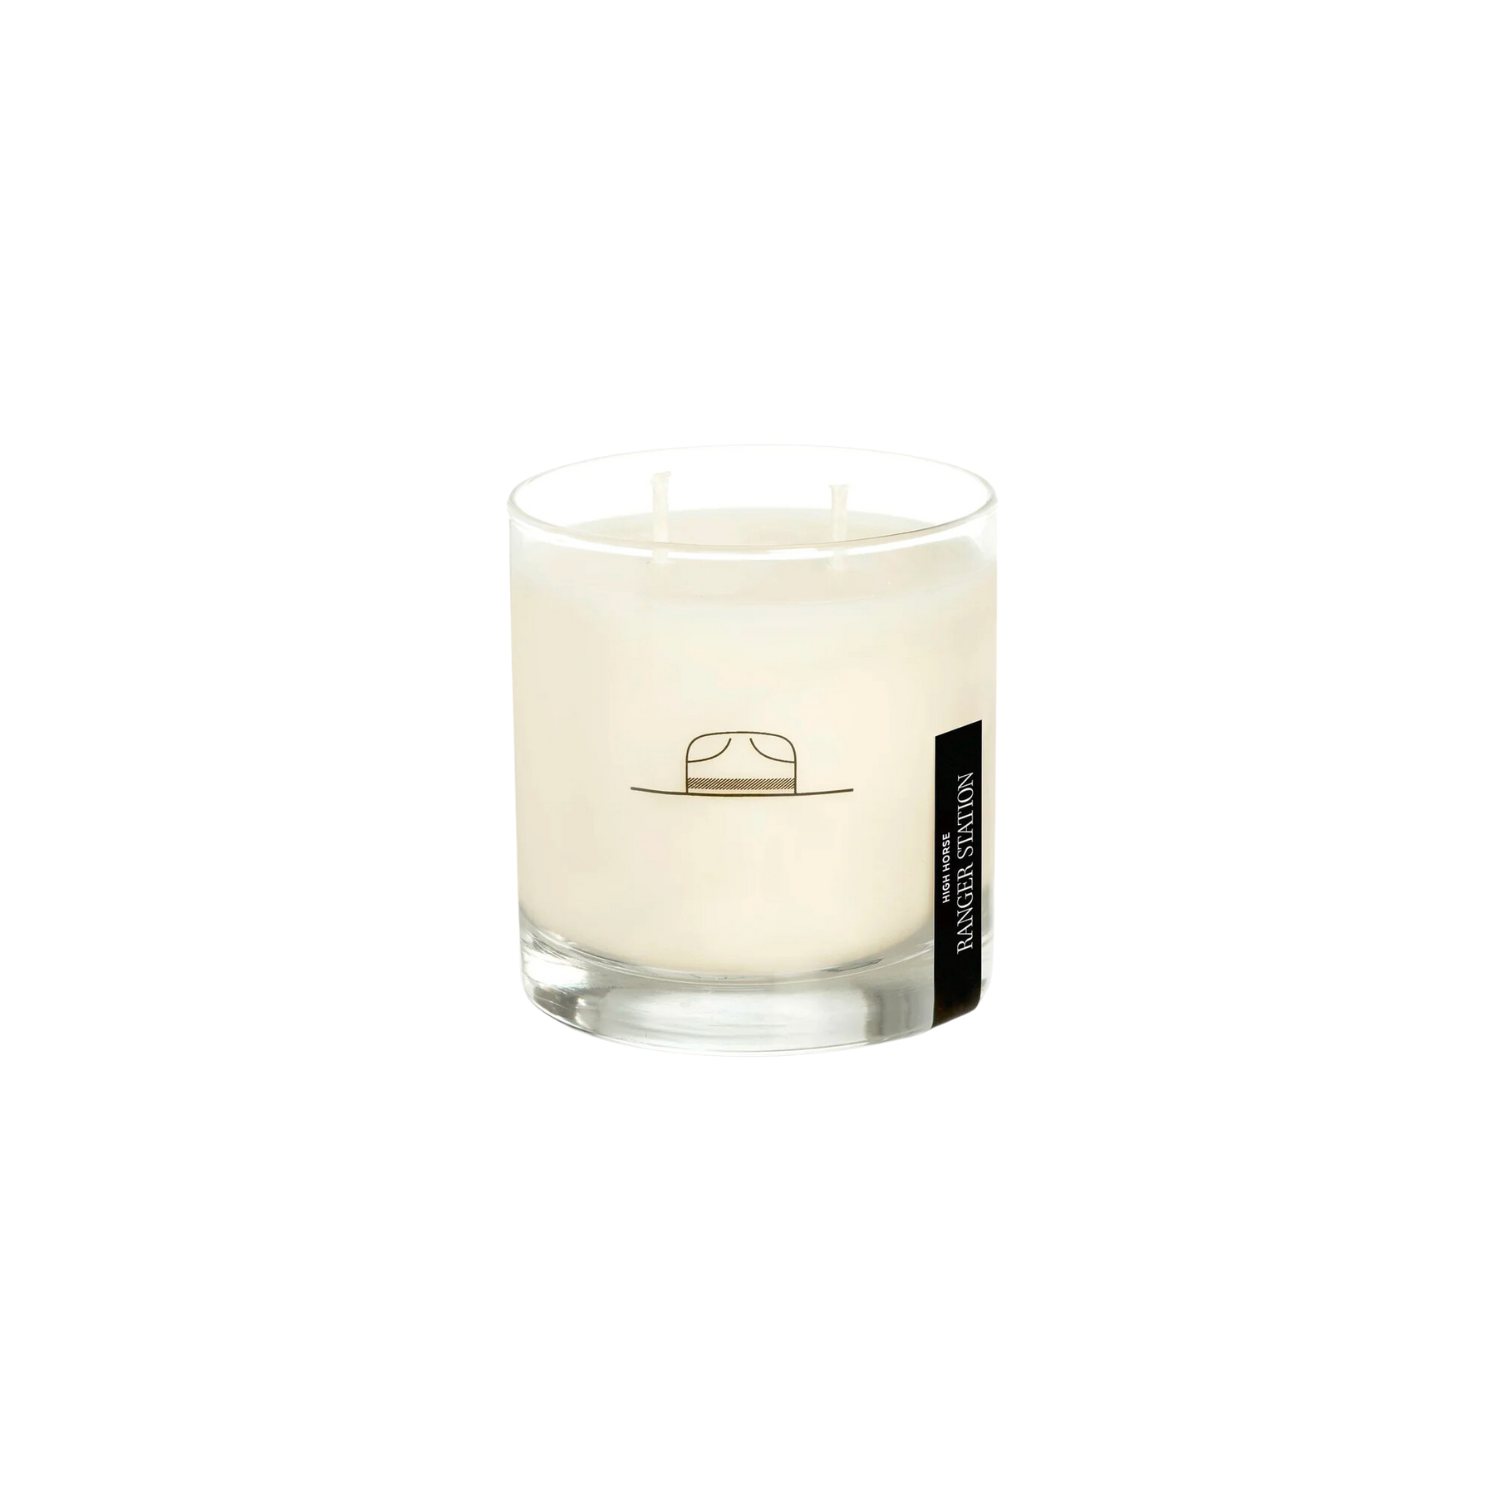 Ranger Station Secented Candle - High Horse